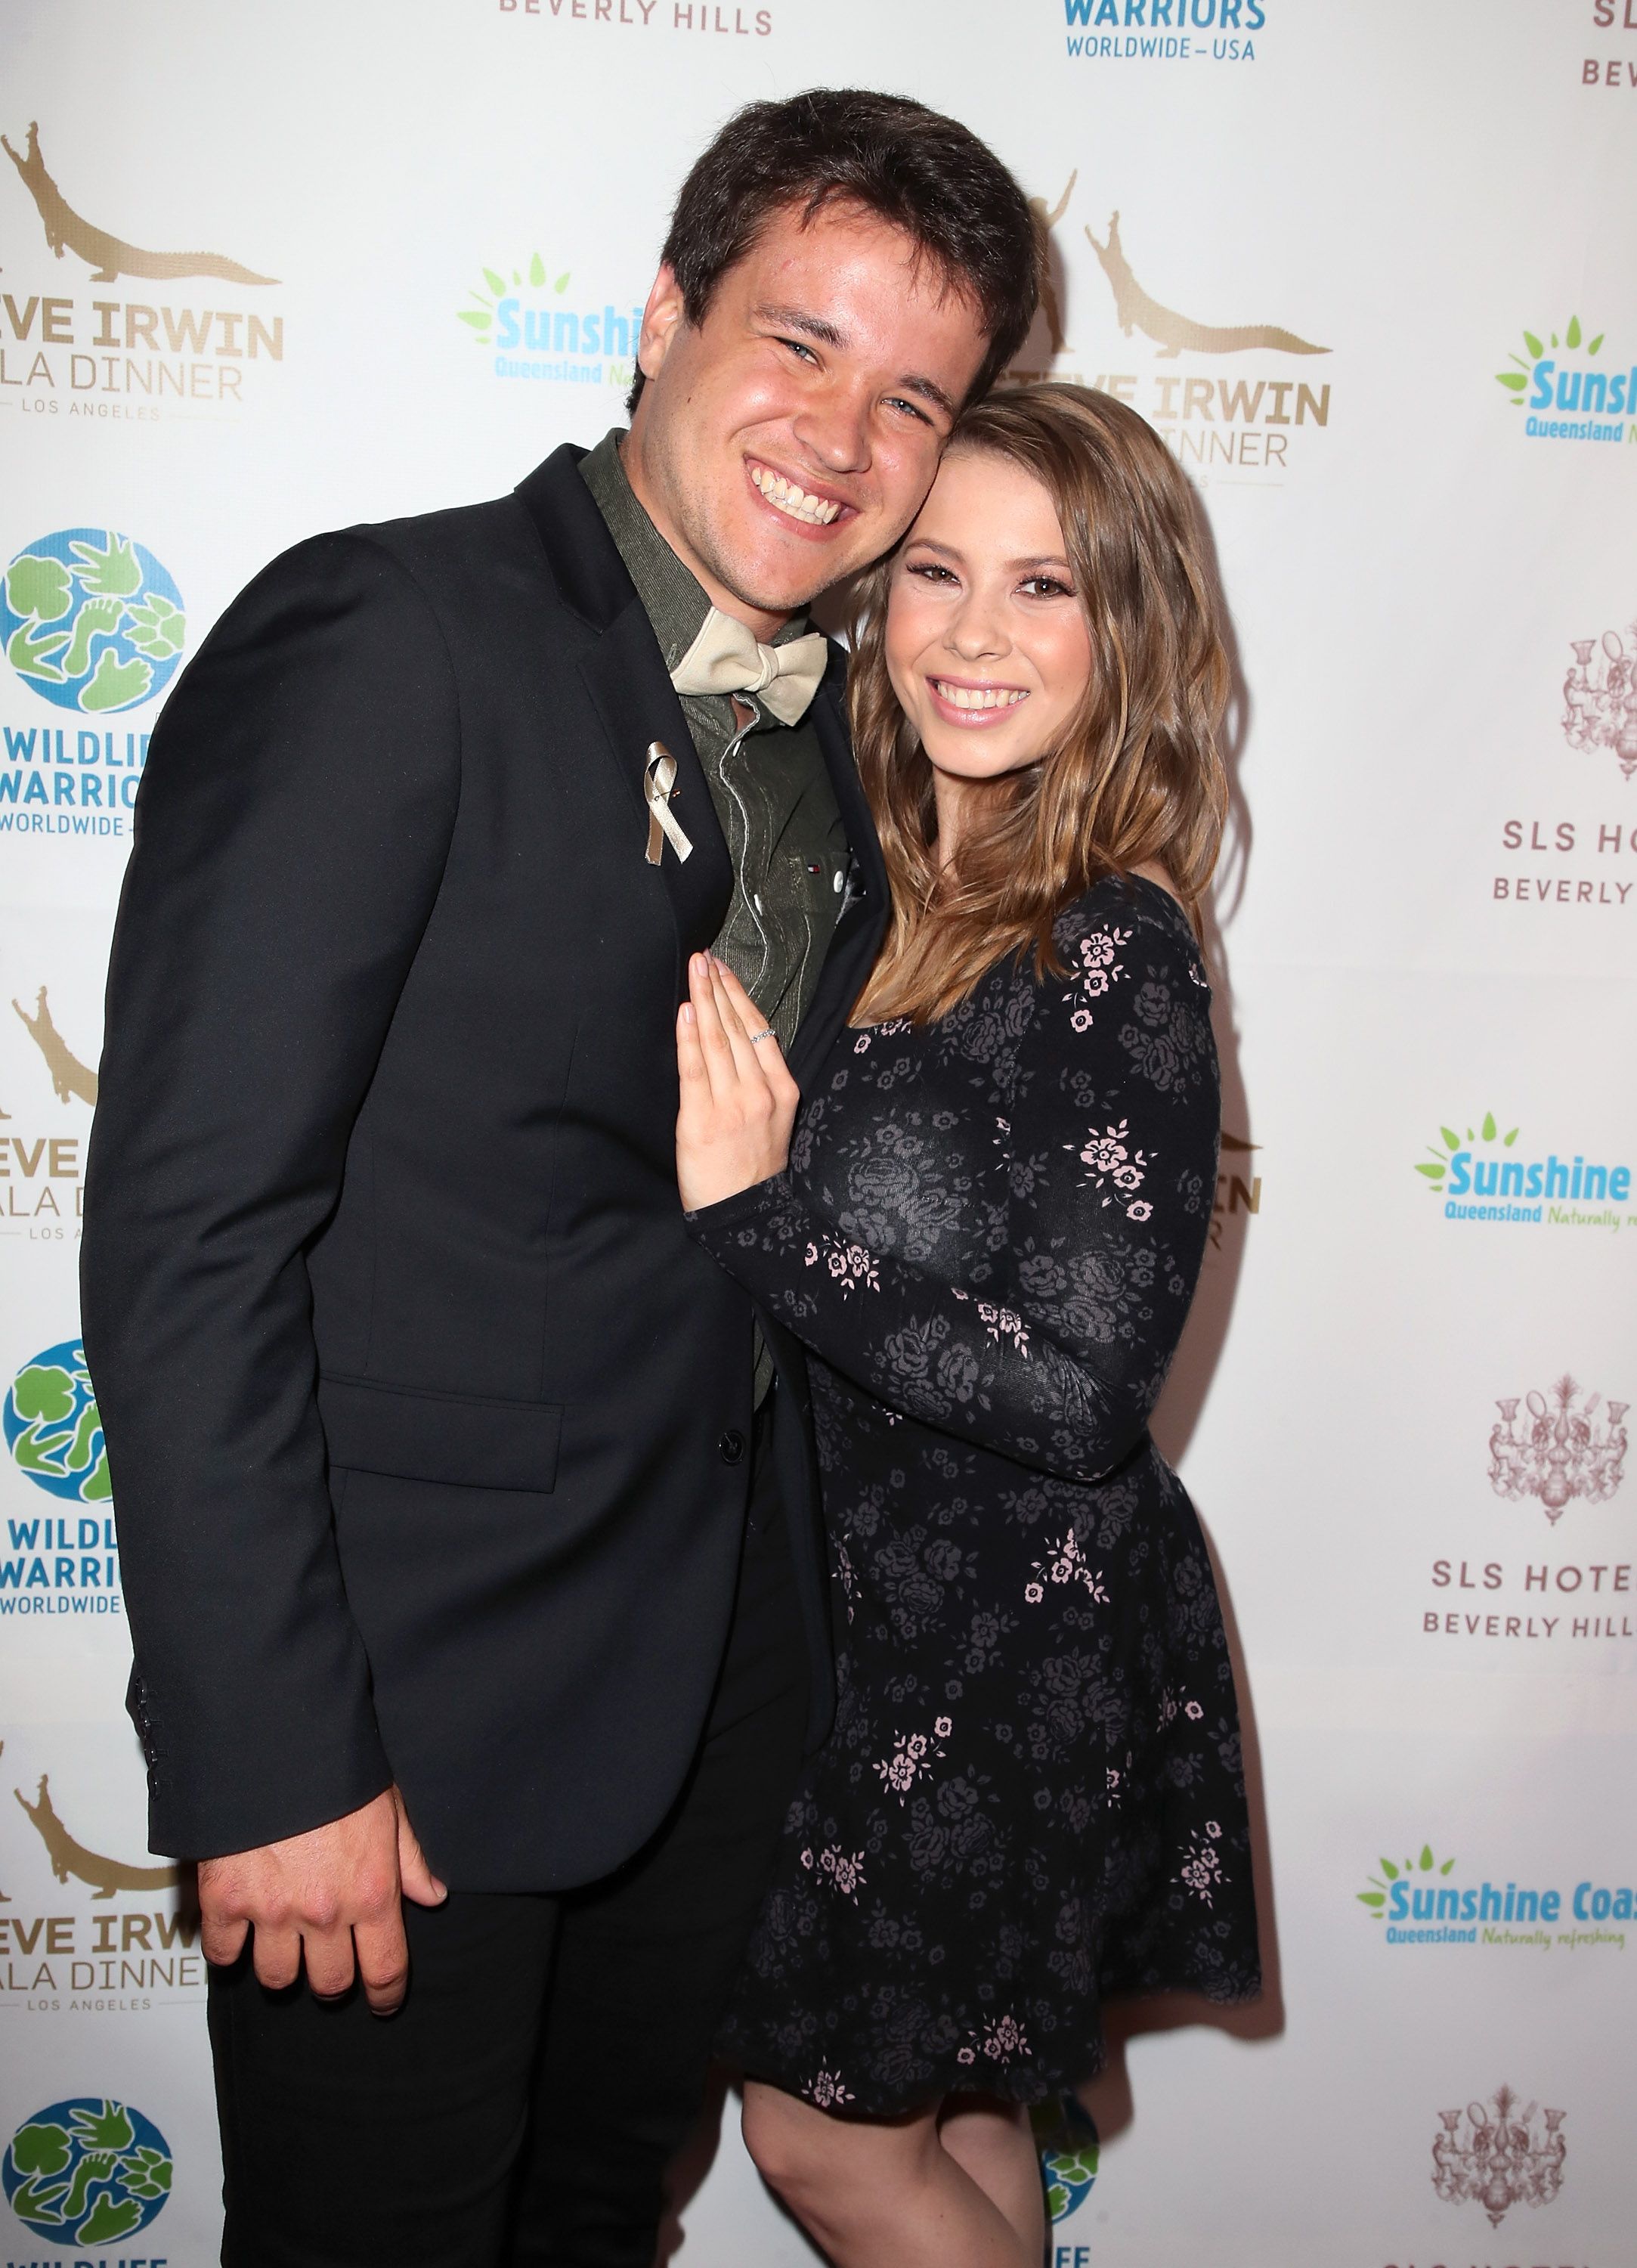 Chandler Powell and Bindi Irwin at the Steve Irwin Gala Dinner held at the SLS Hotel on May 5, 2018, in Beverly Hills, California | Photo: David Livingston/Getty Images